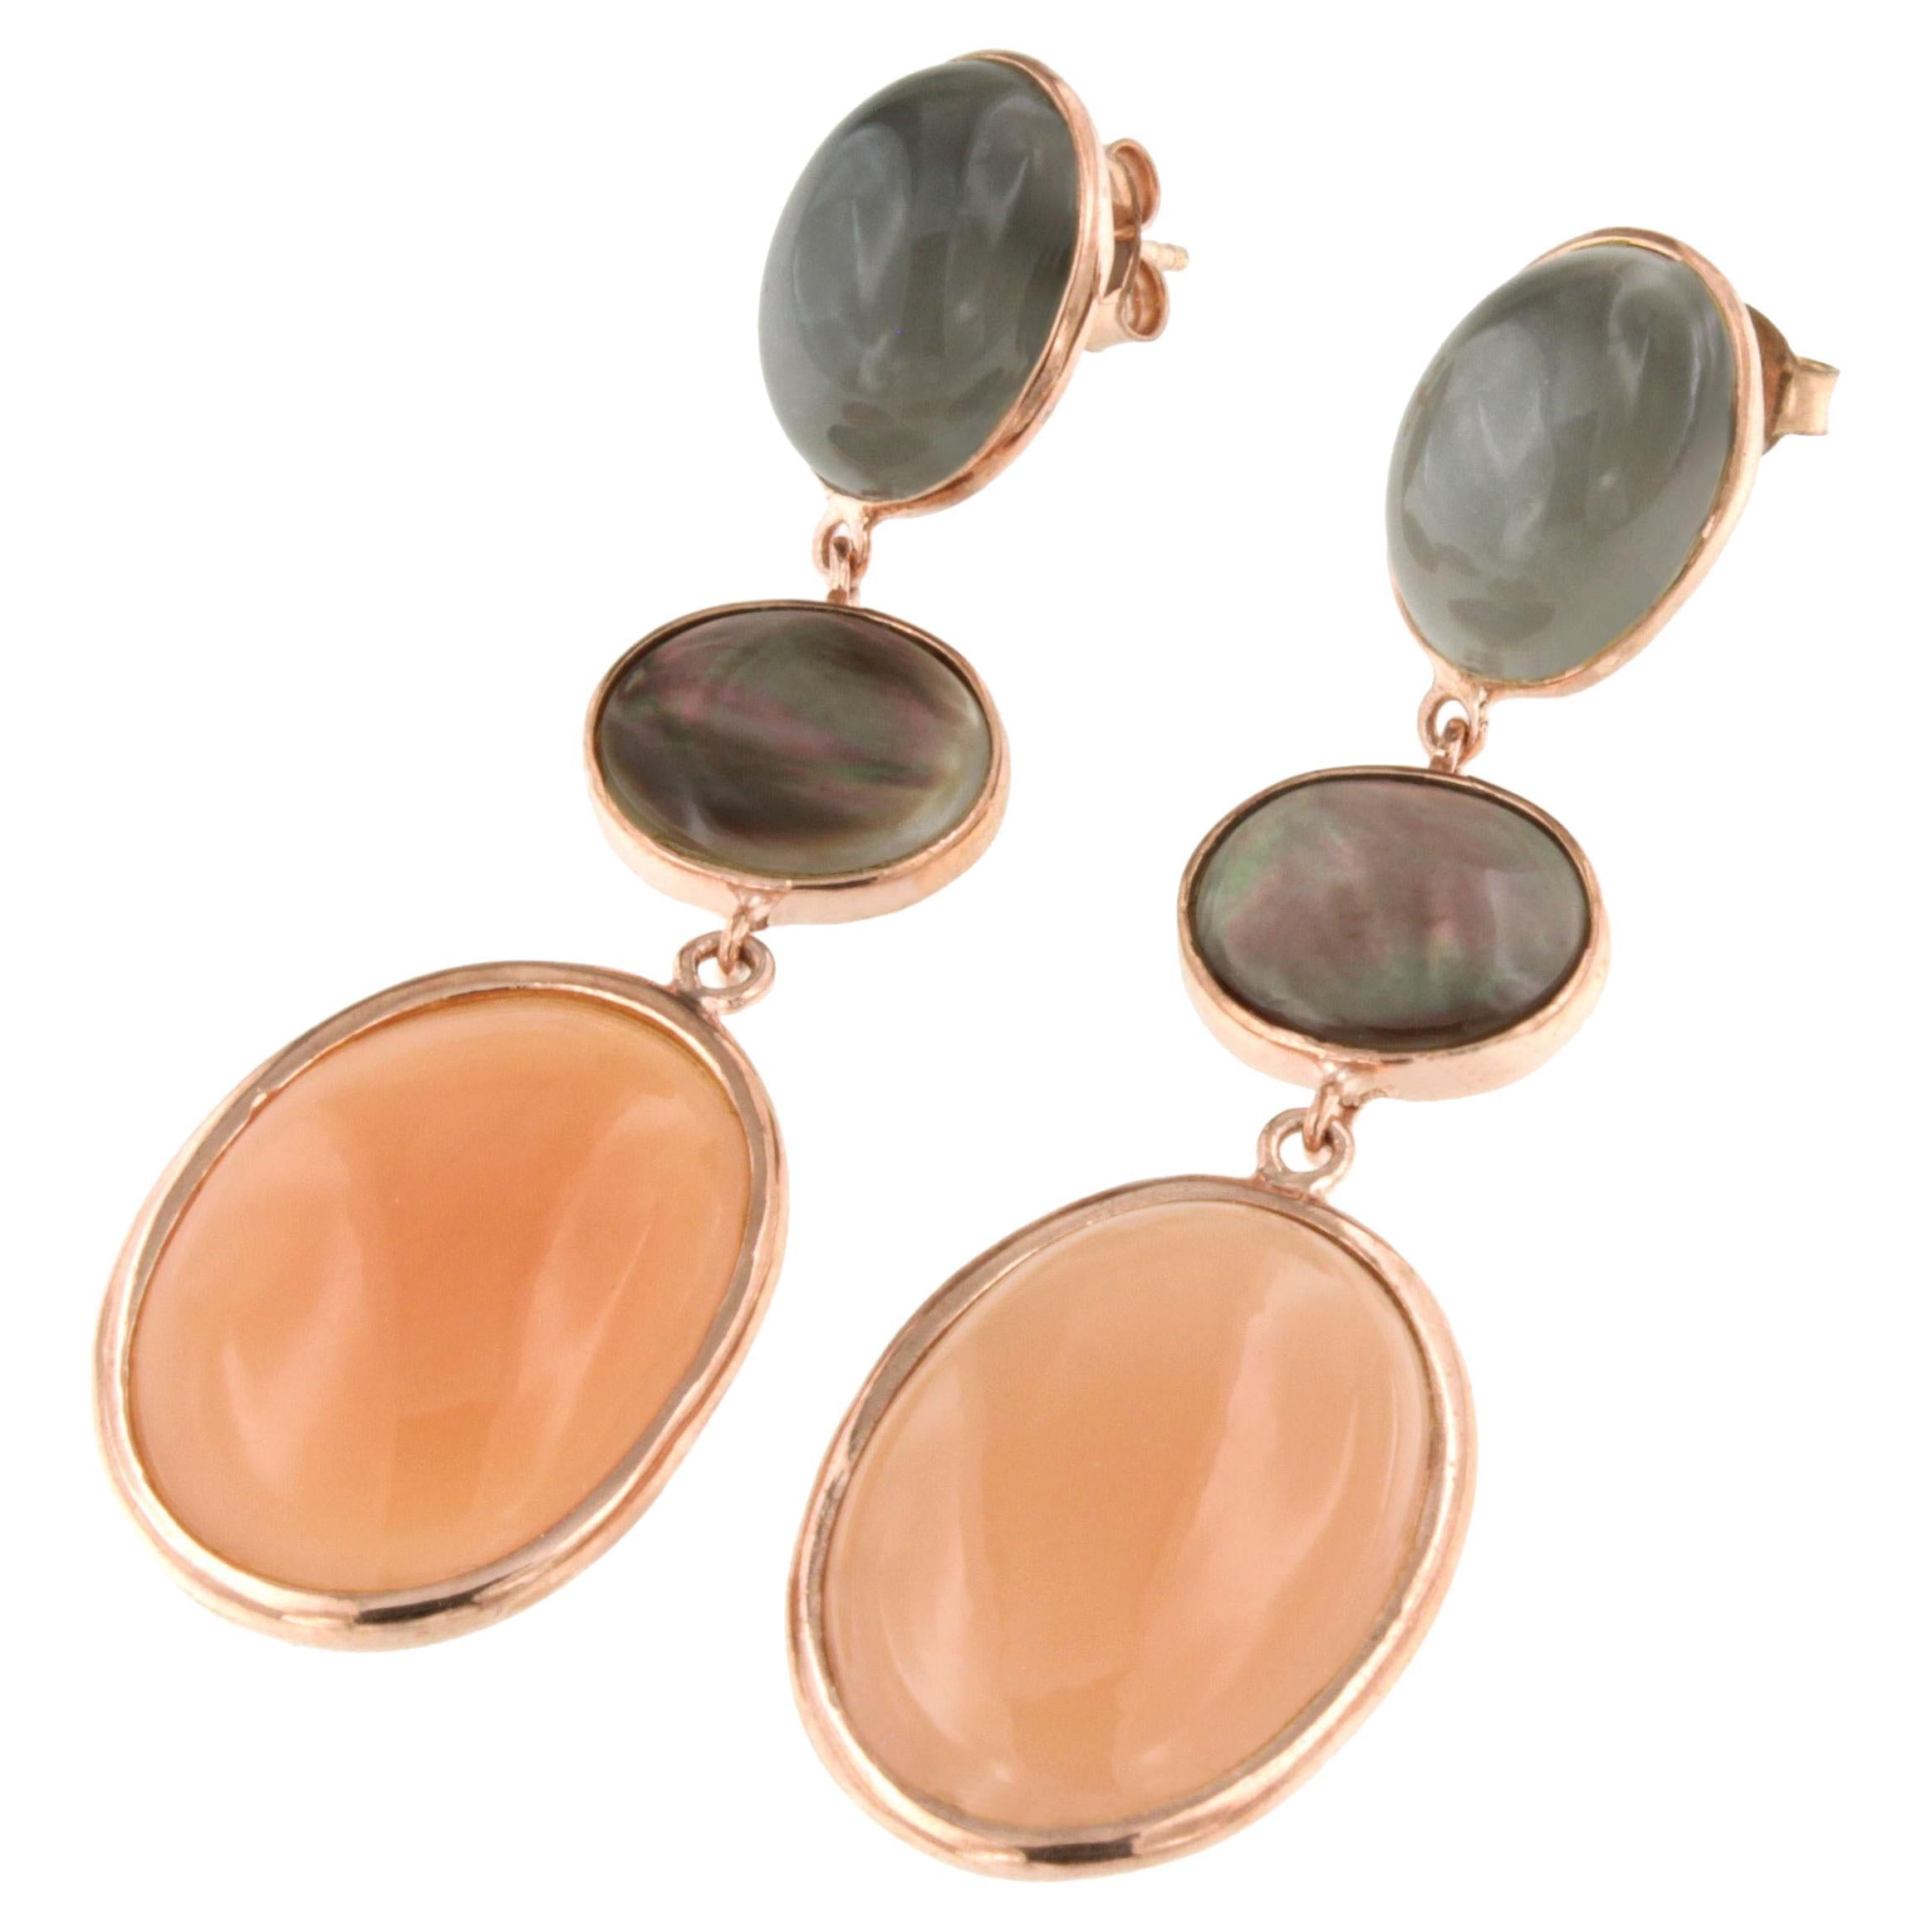 9 Kt Rose Gold With Natural Colored Stones Fashion Earrings For Sale